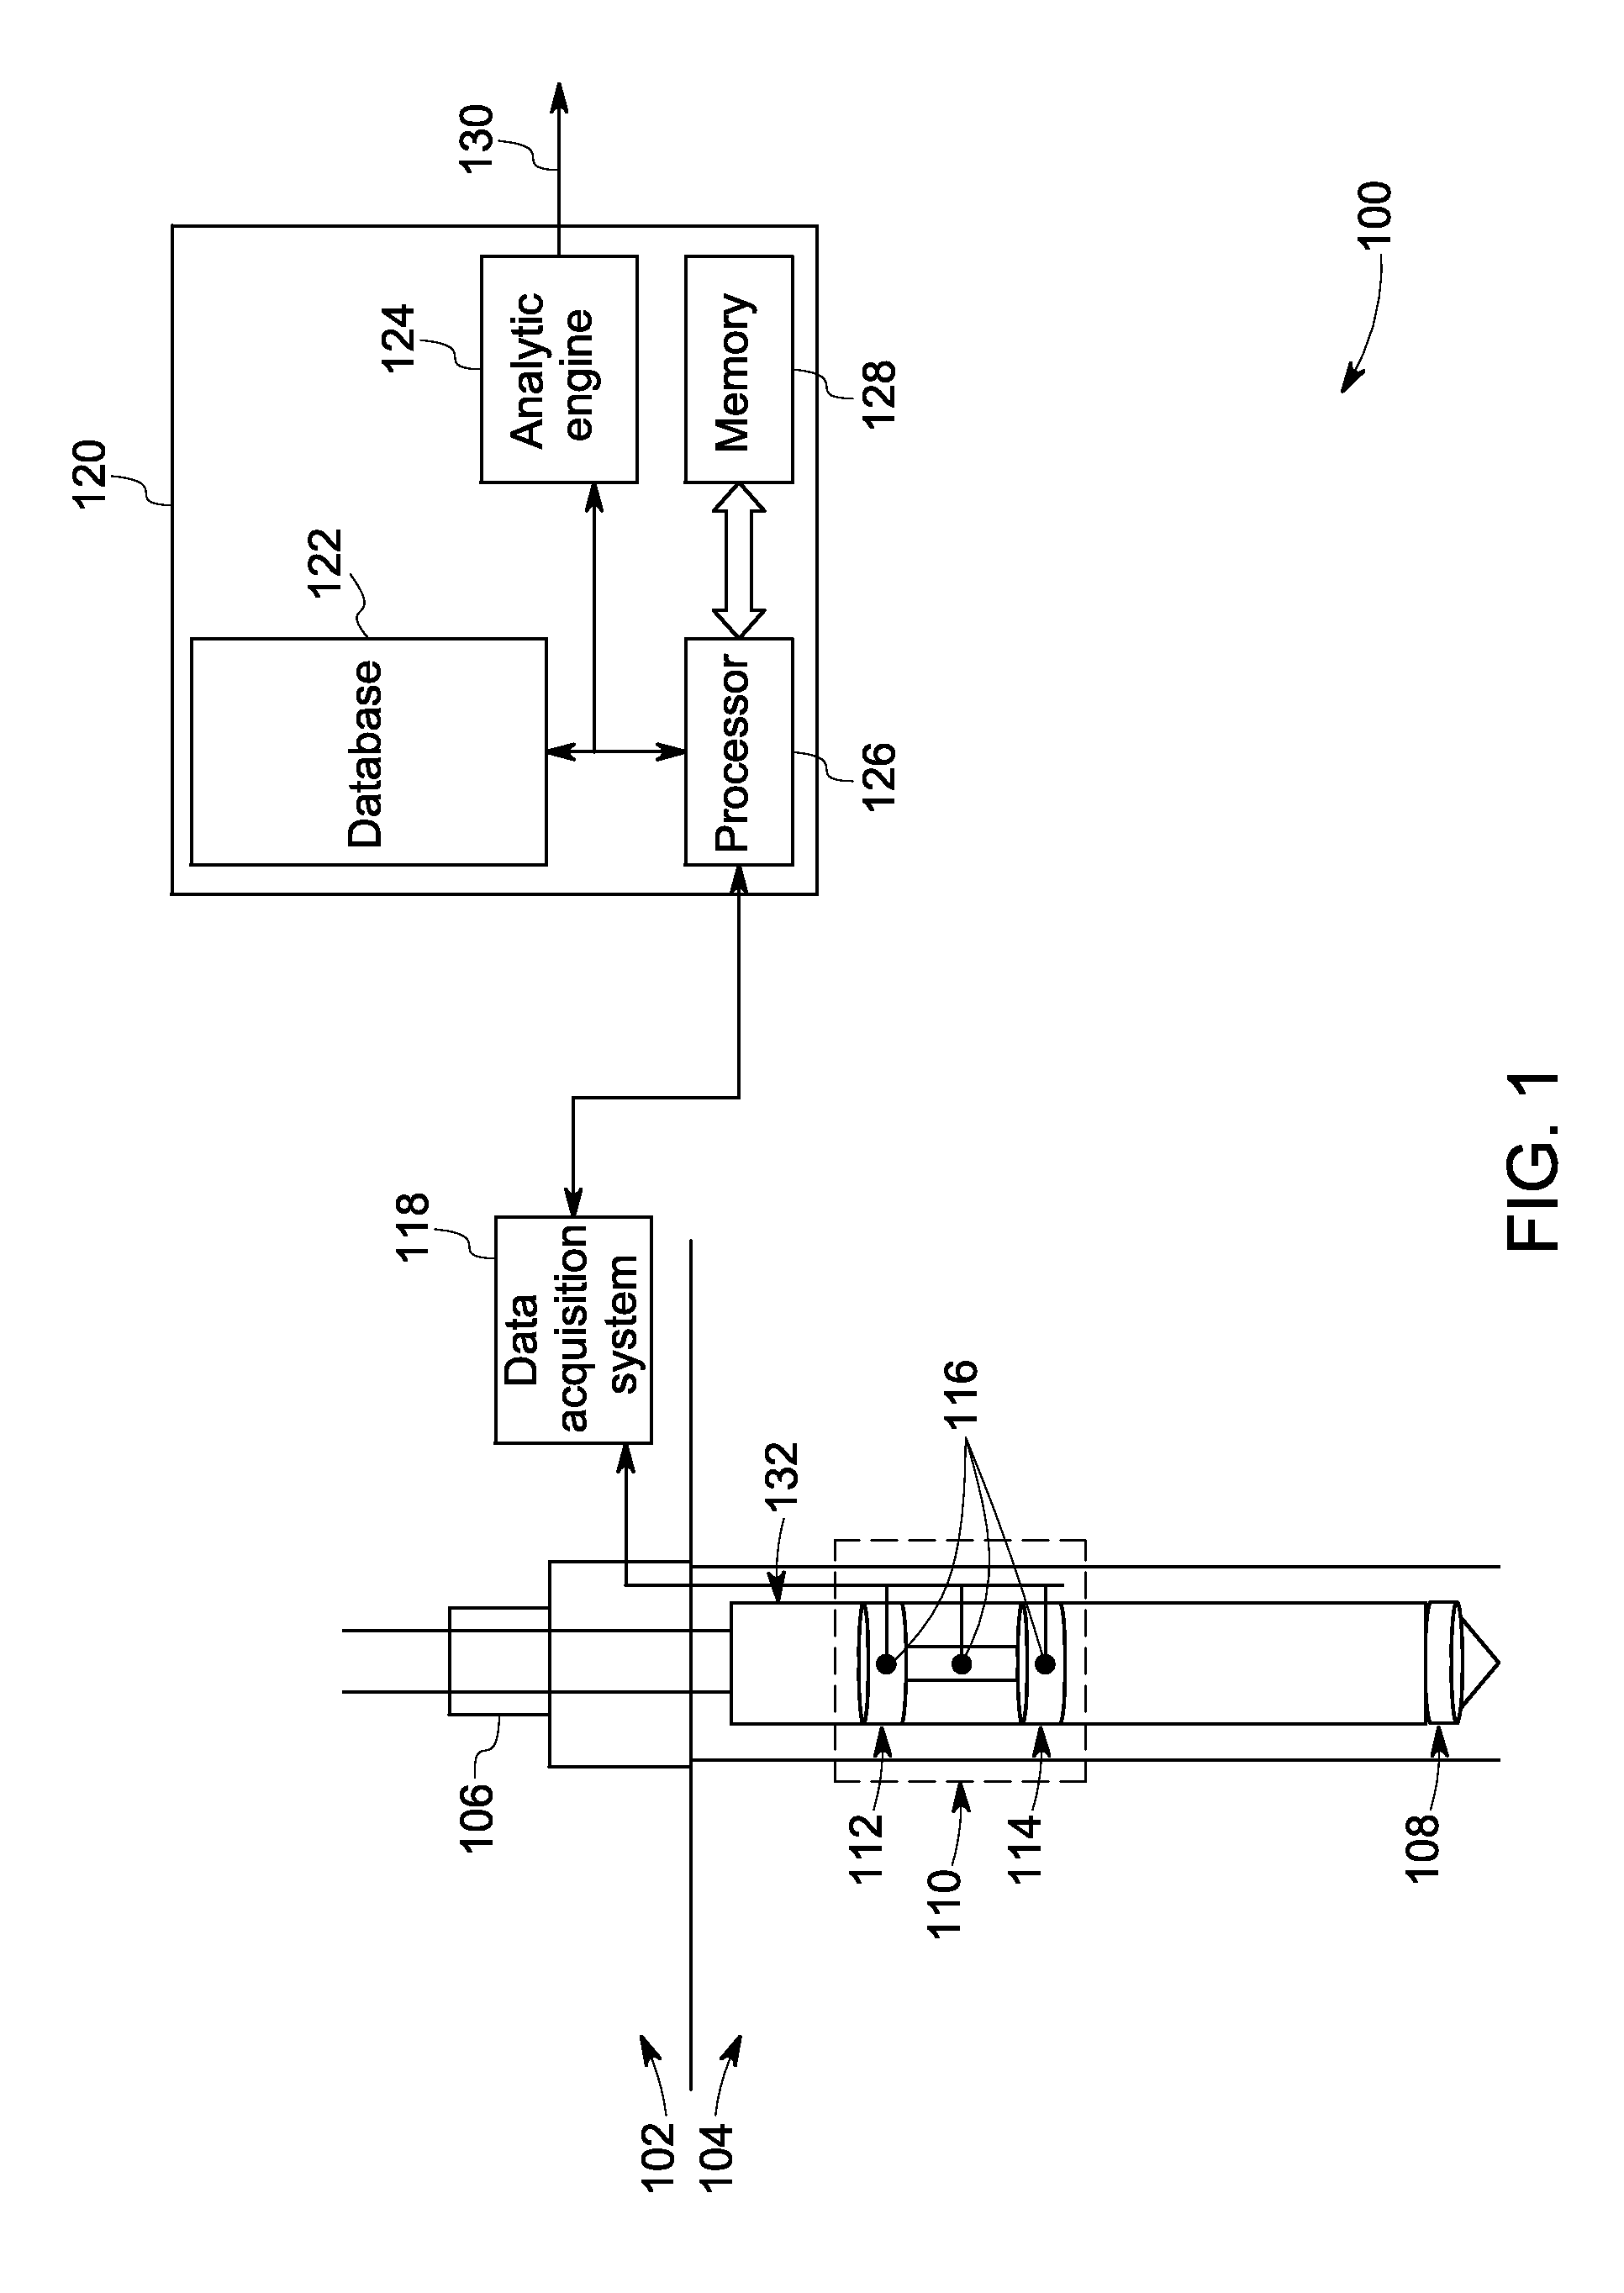 System and method for fault detection in an electrical device